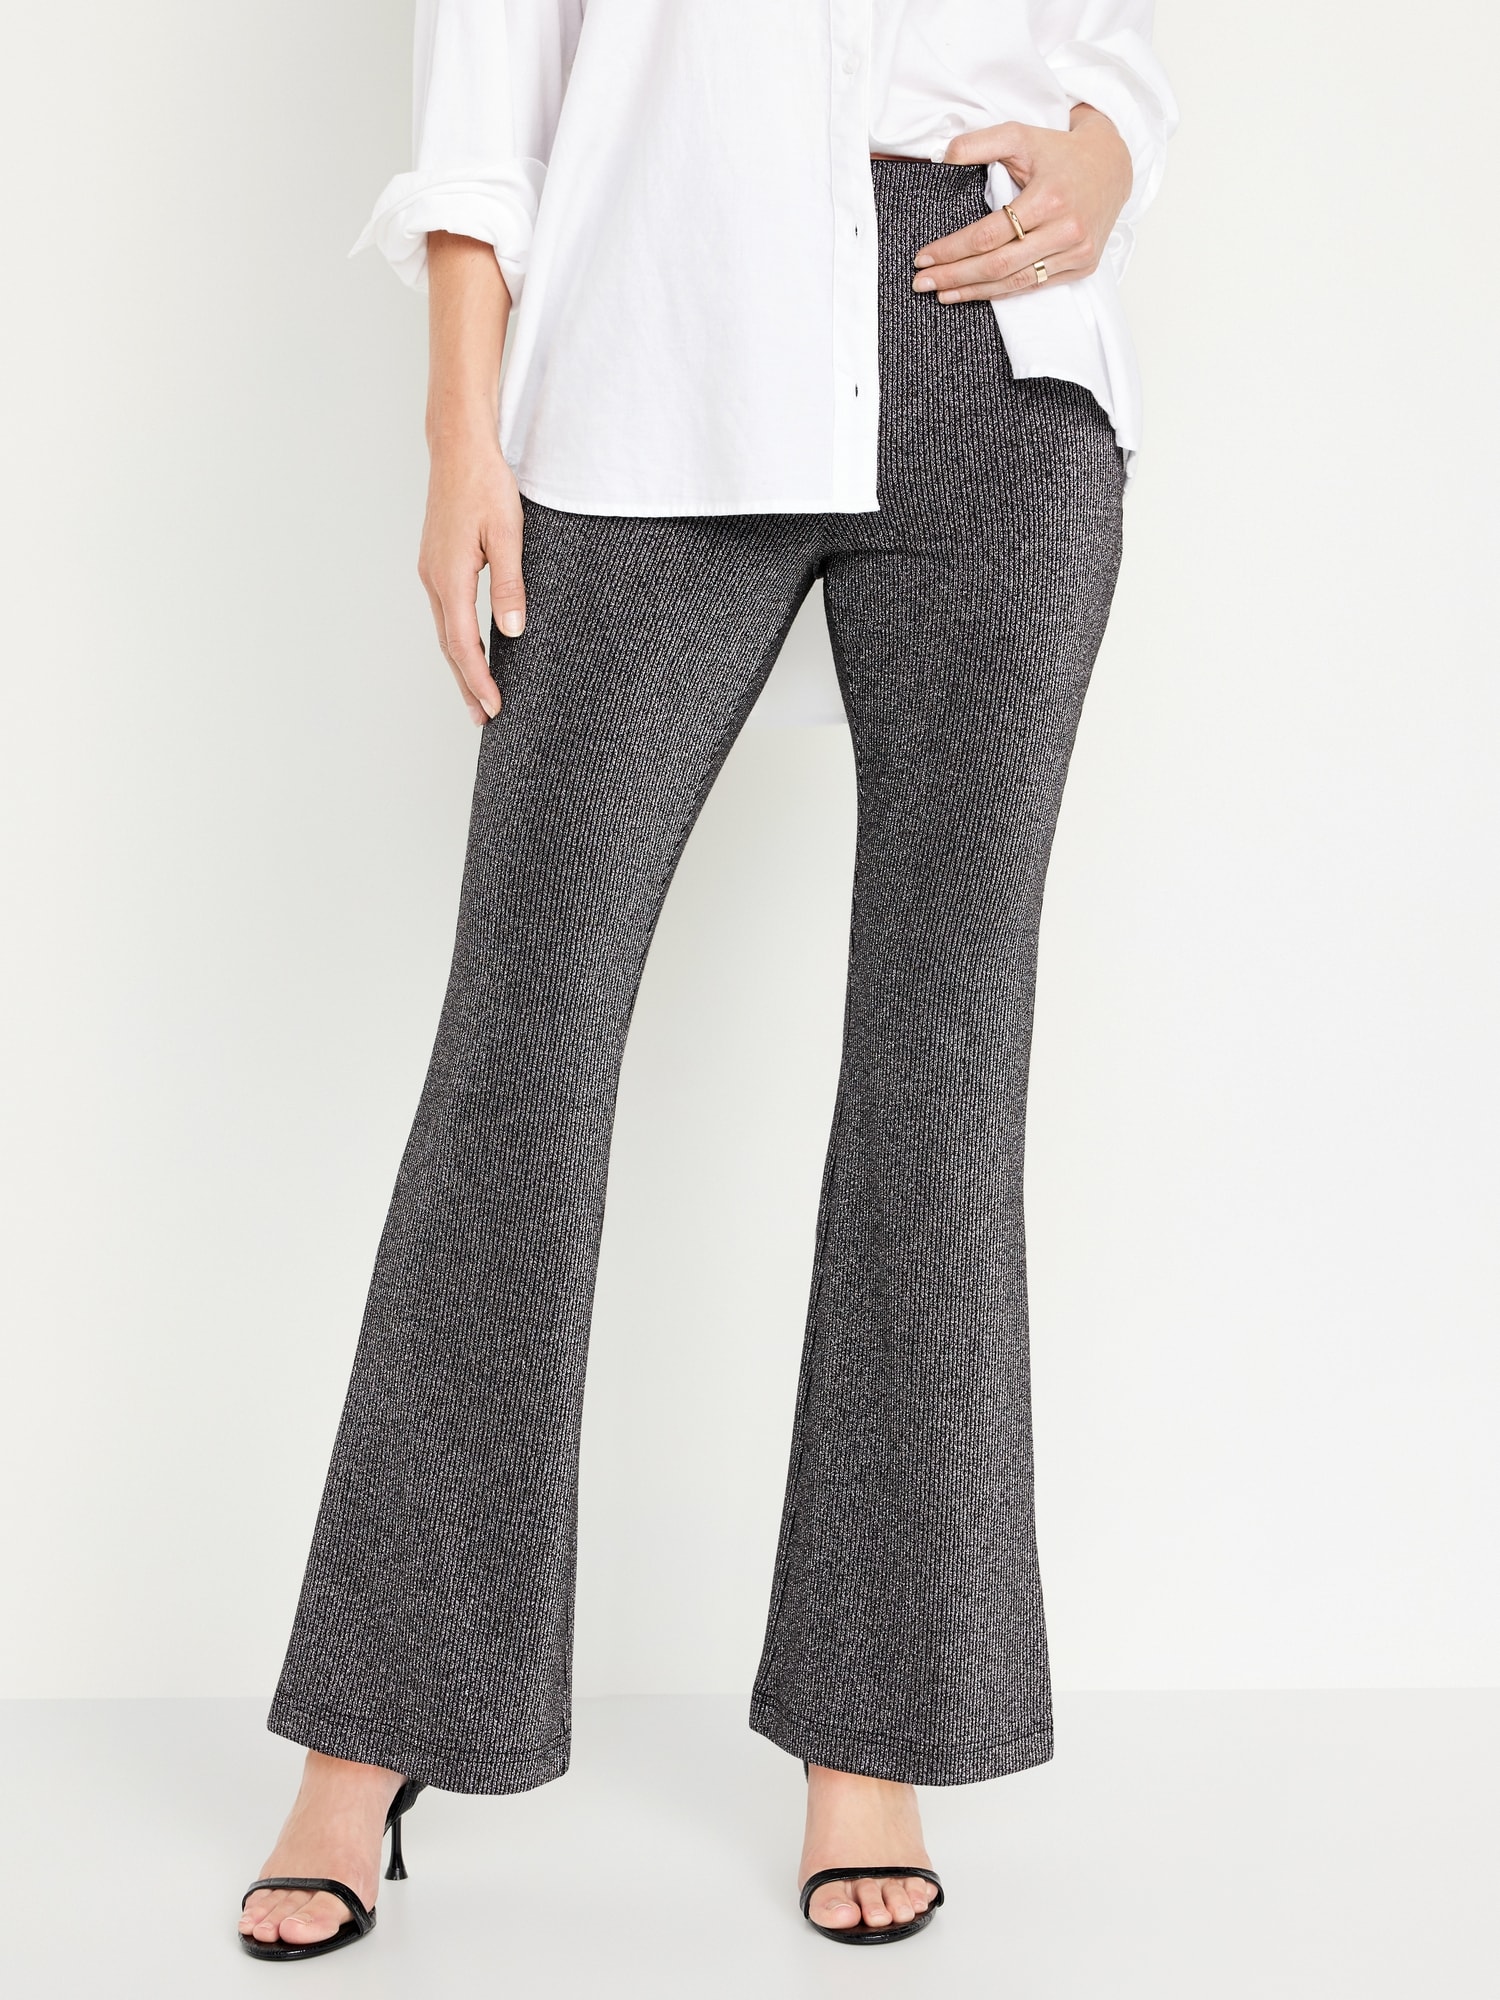 Gray Solid Color High Waist Ribbed Flare Pants 